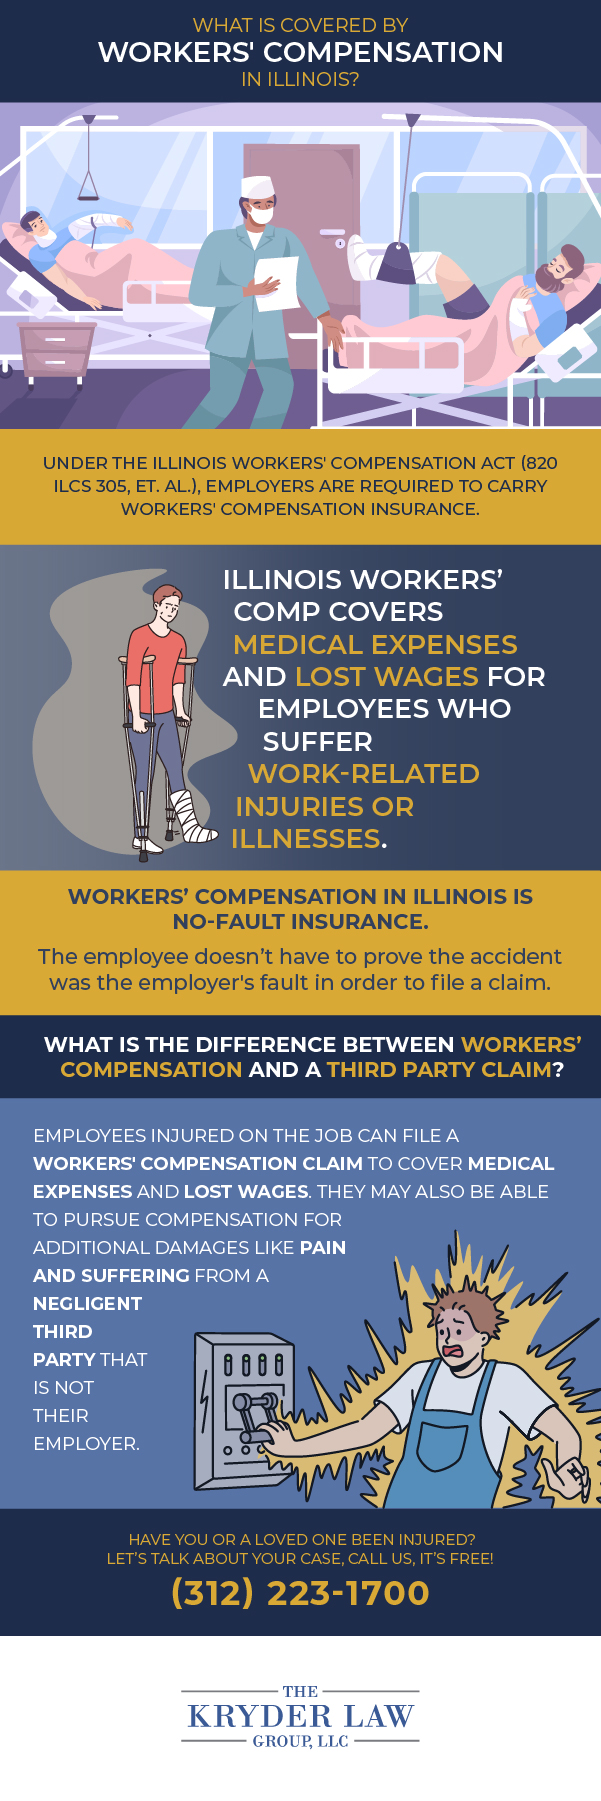 What Is Covered by Workers' Compensation in Illinois?